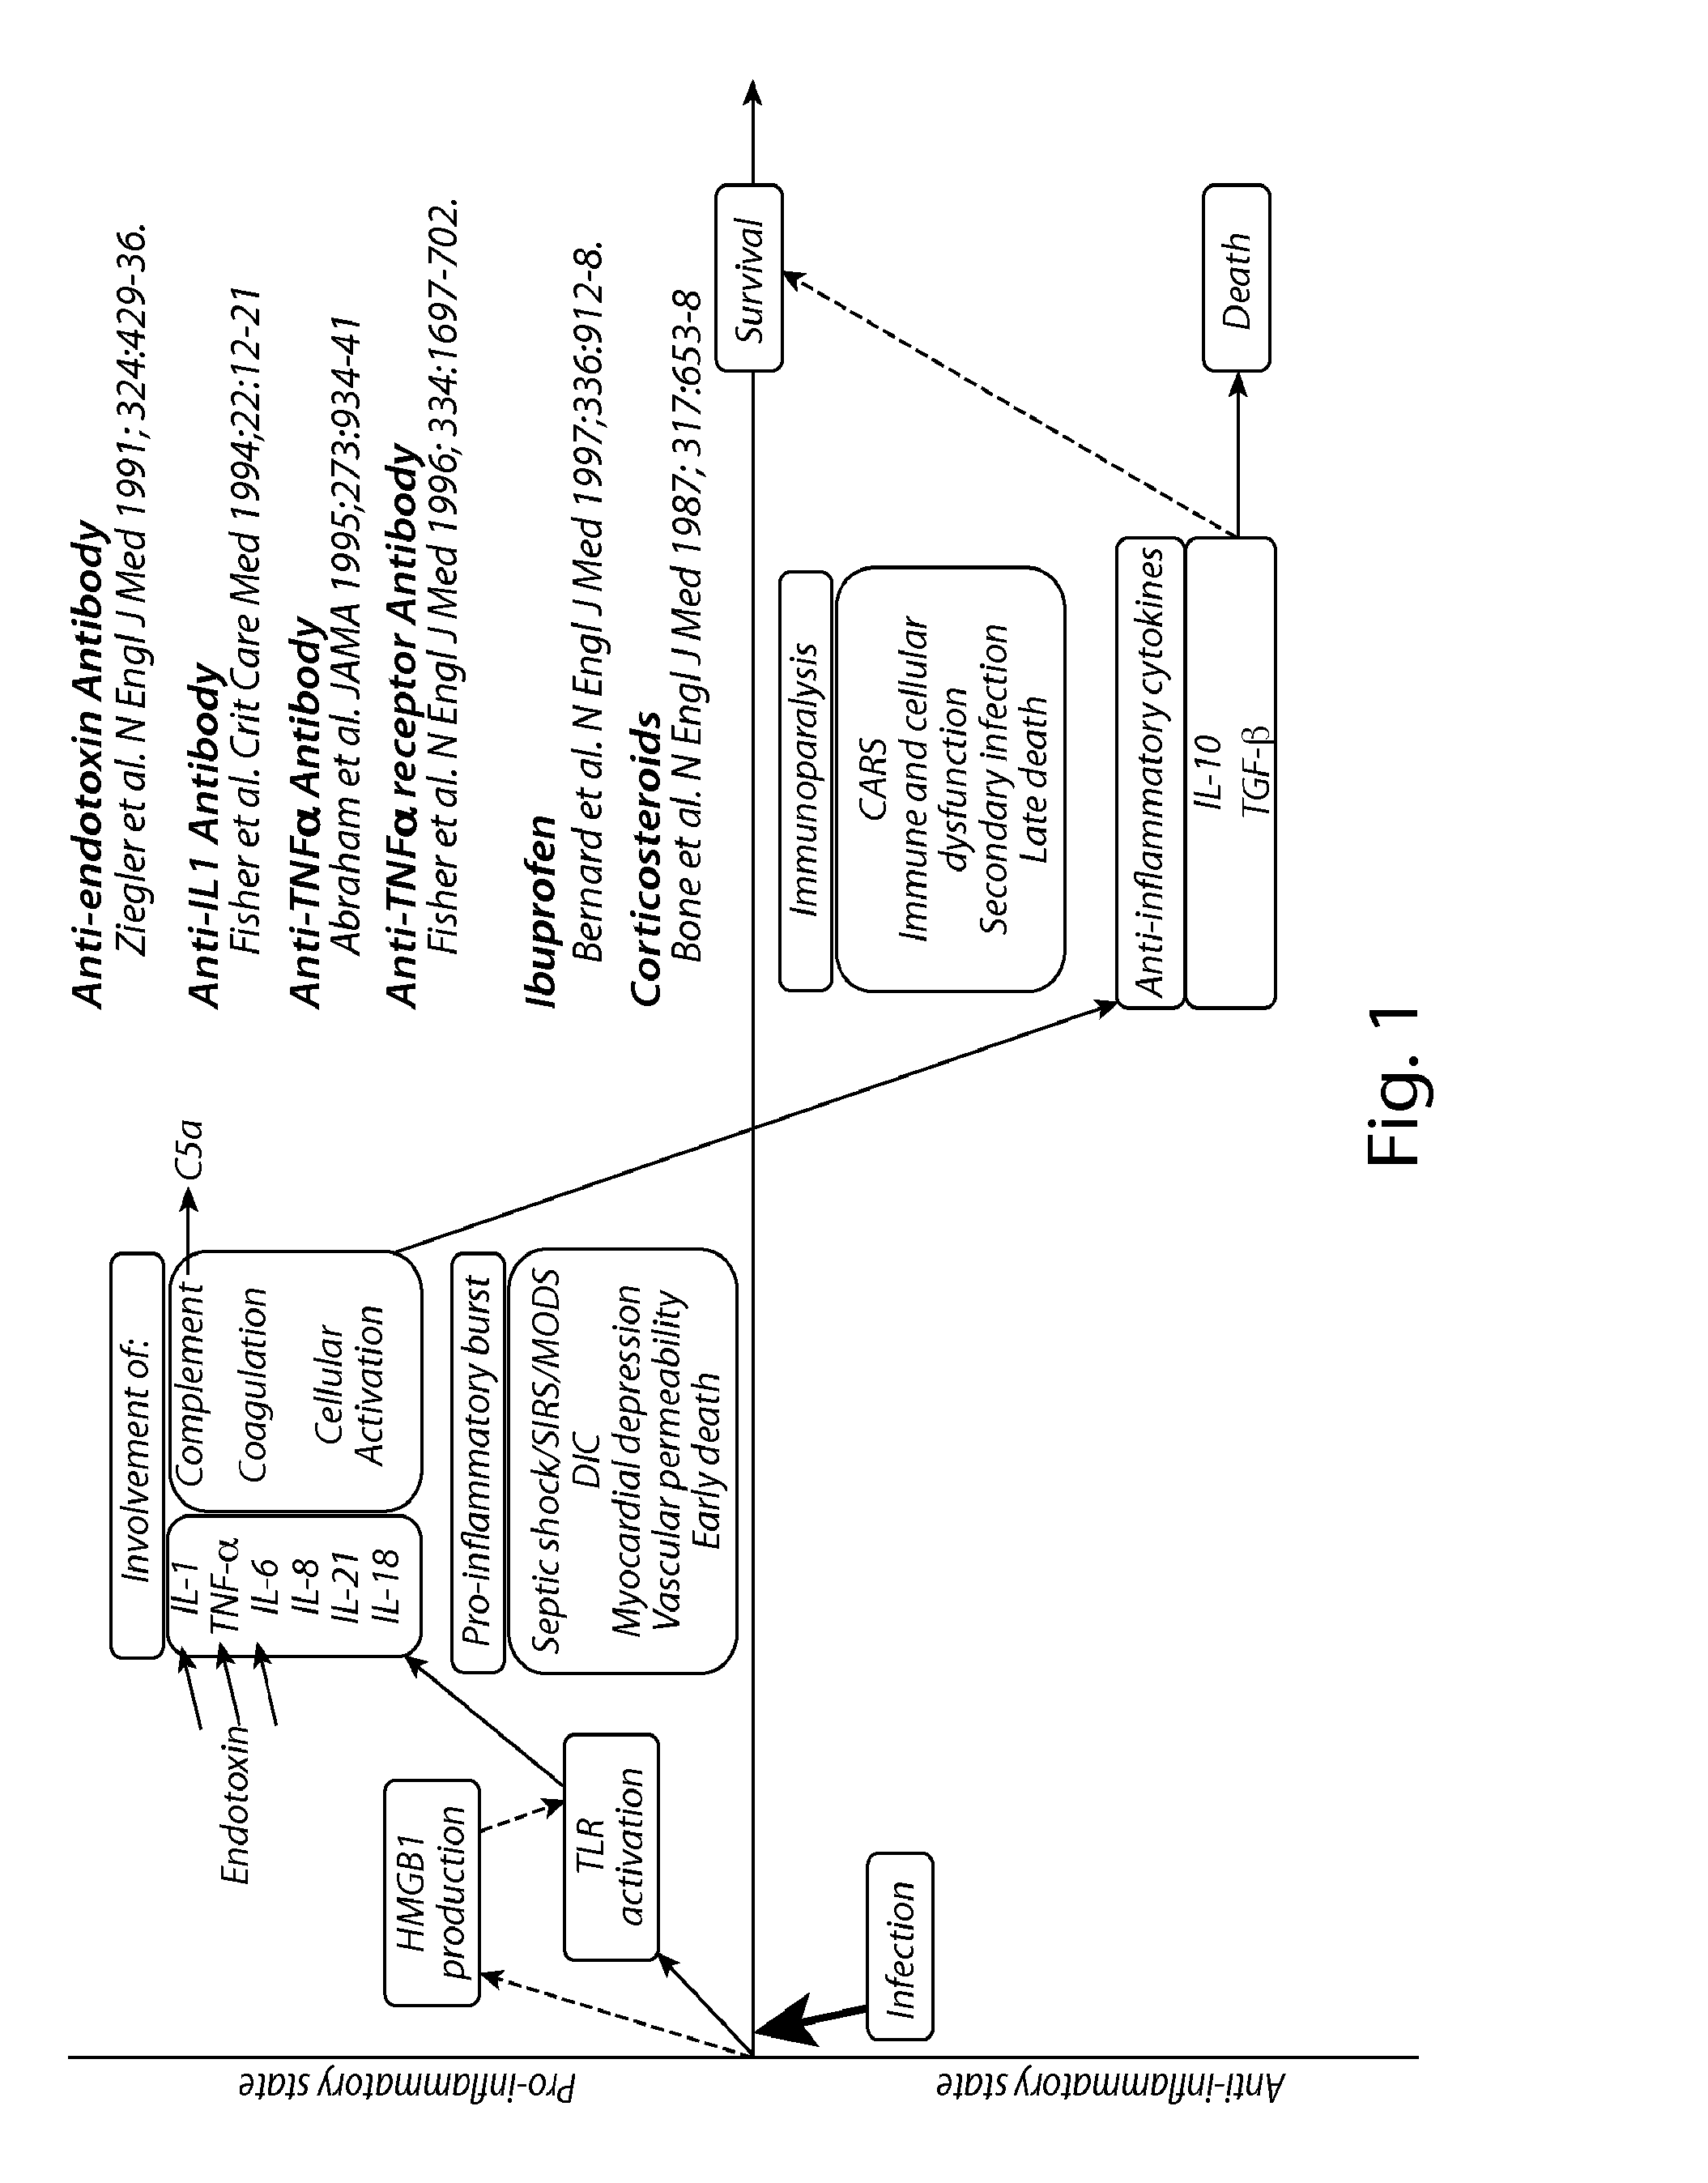 Systems and methods for extracorporeal blood modification